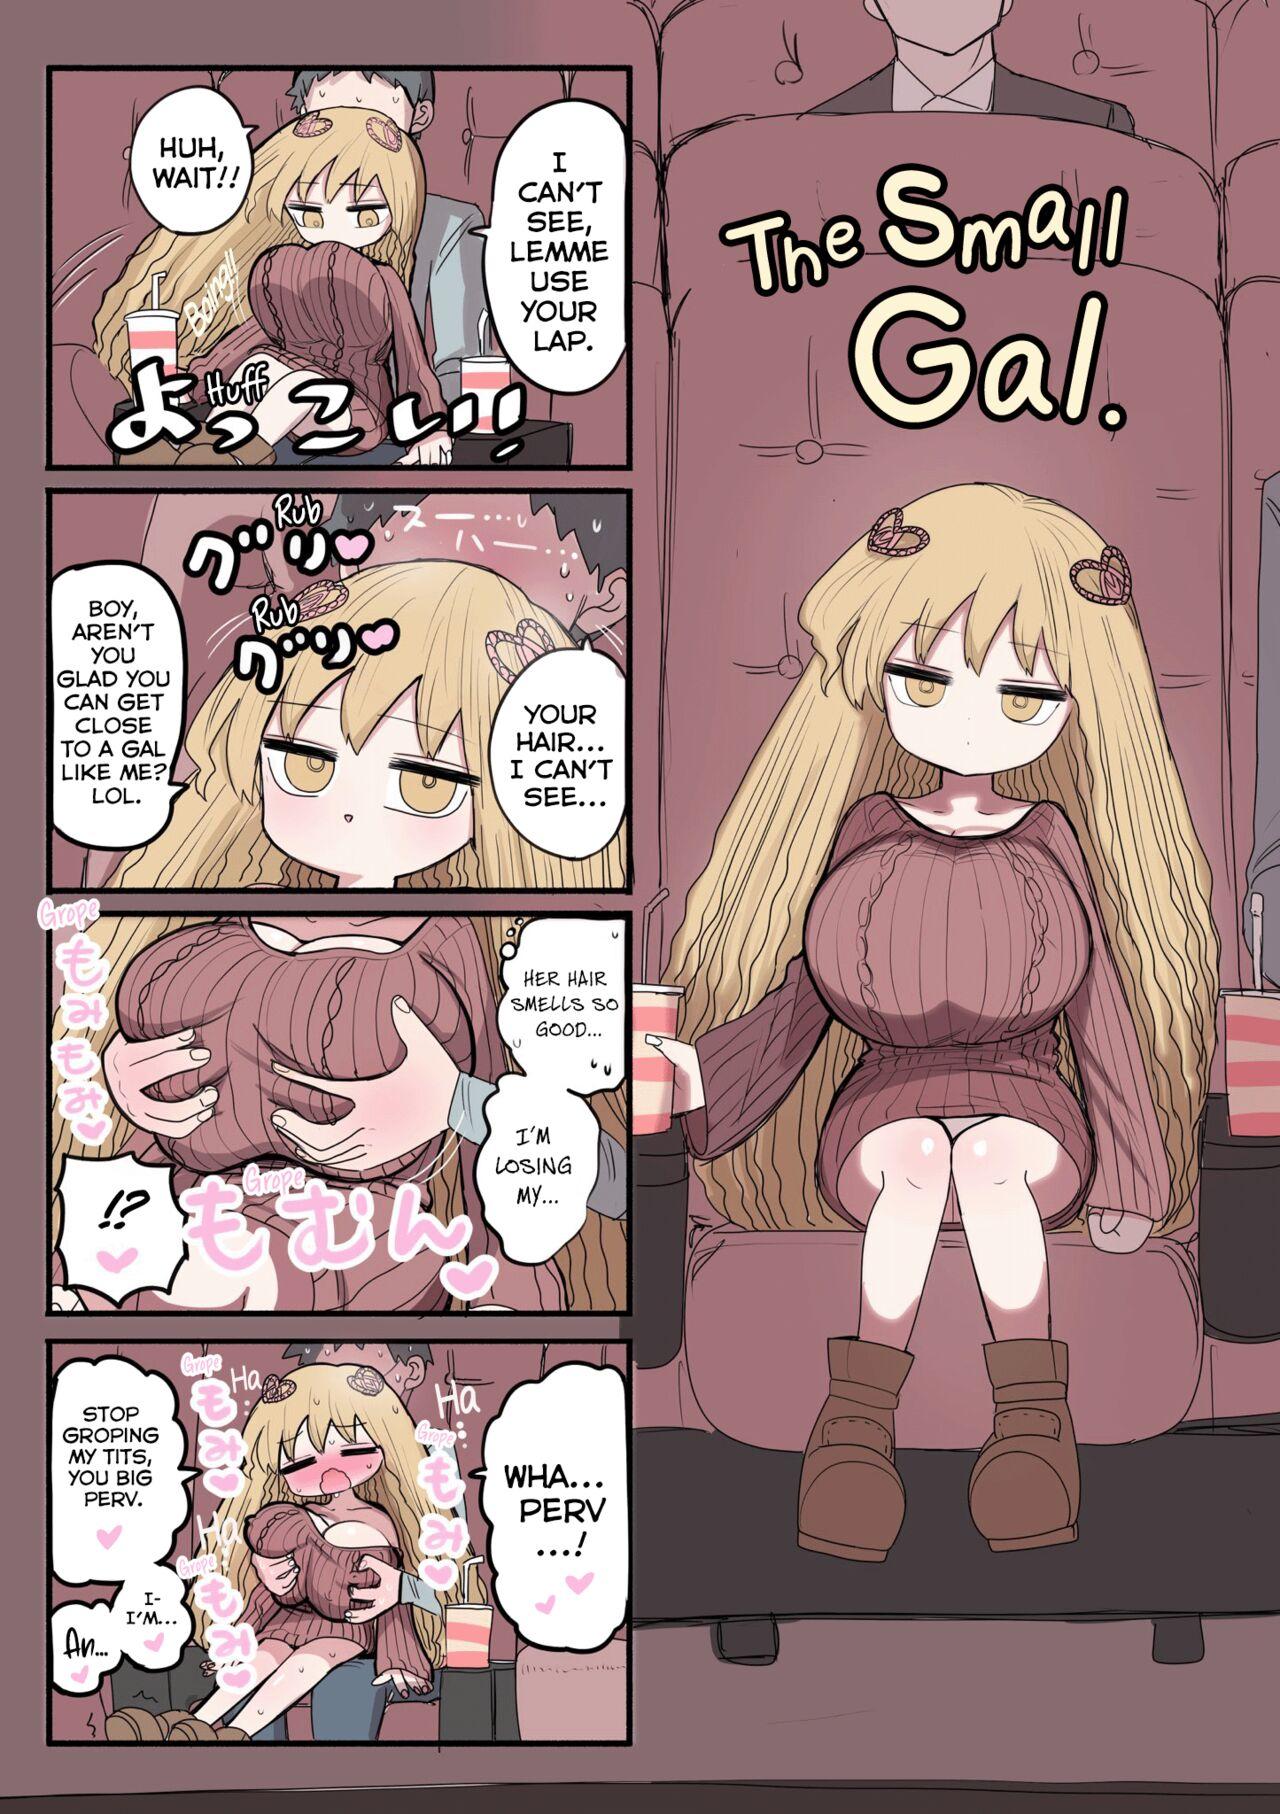 Chiisai Gal | The Small Gal 13